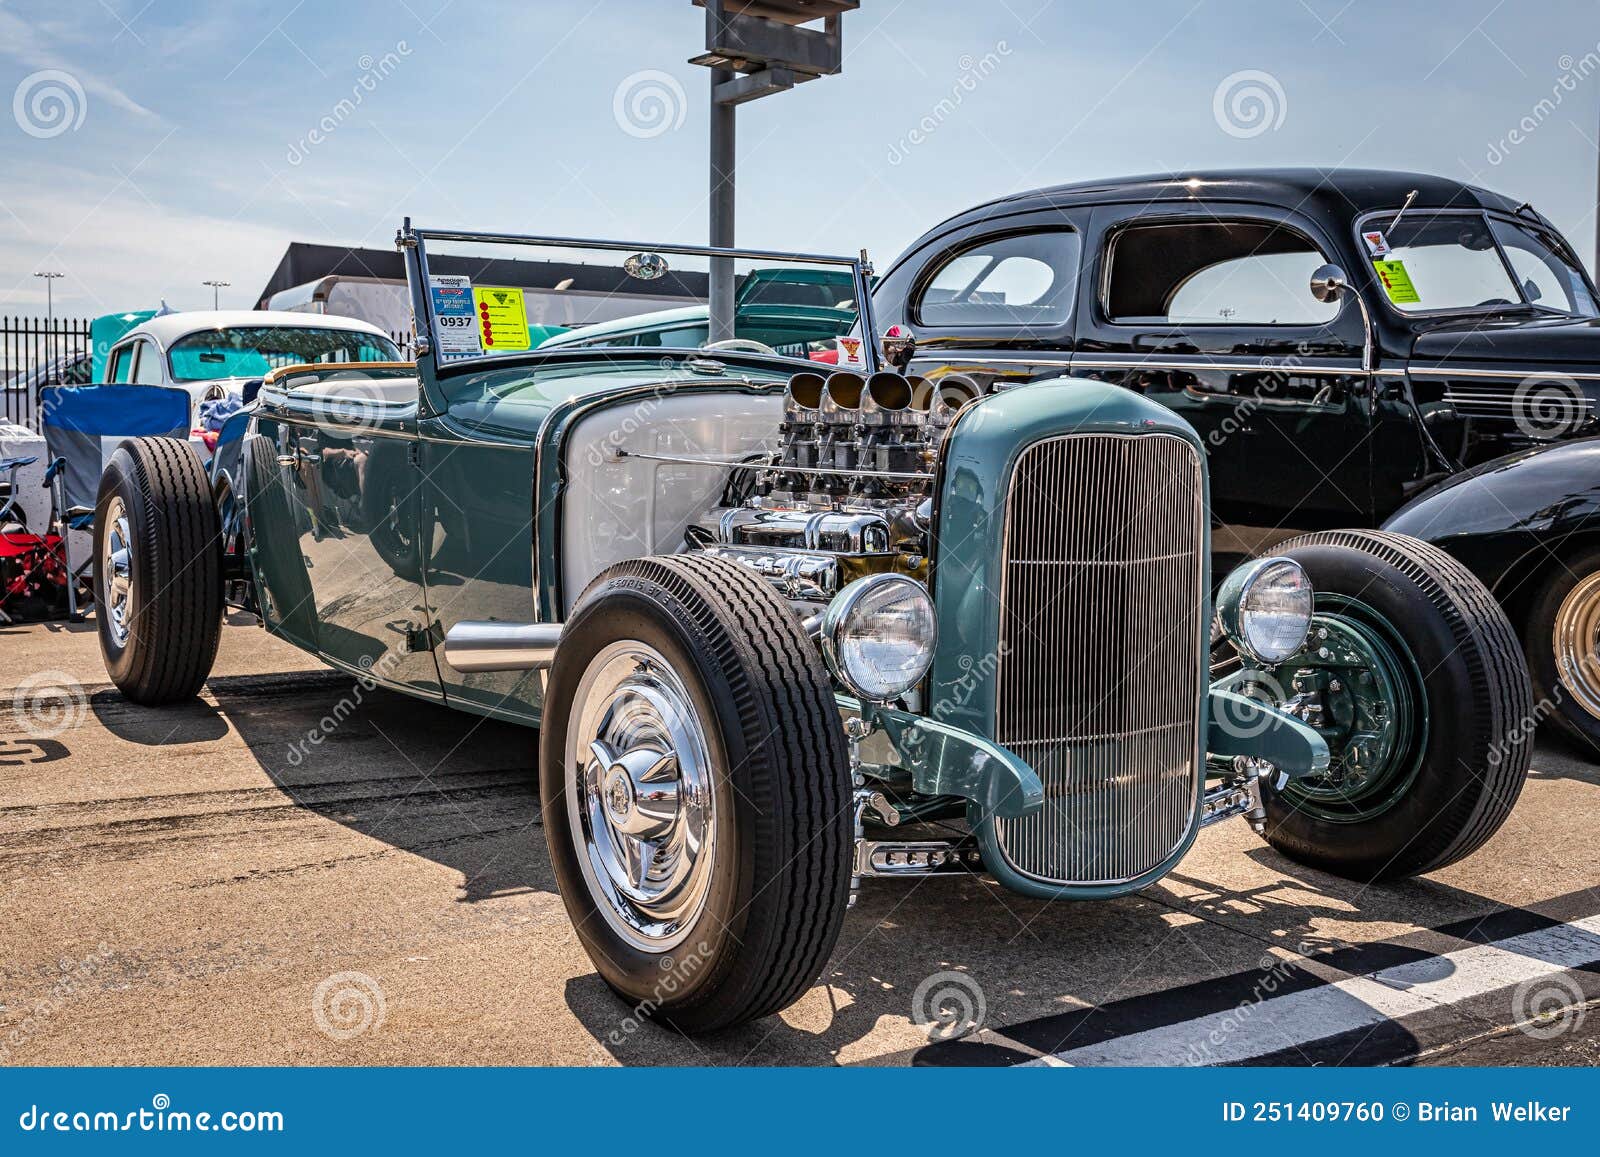 Lebanon, TN - May 14, 2022: Low perspective front corner view of a 1931 Ford Model A Roadster at a local car show